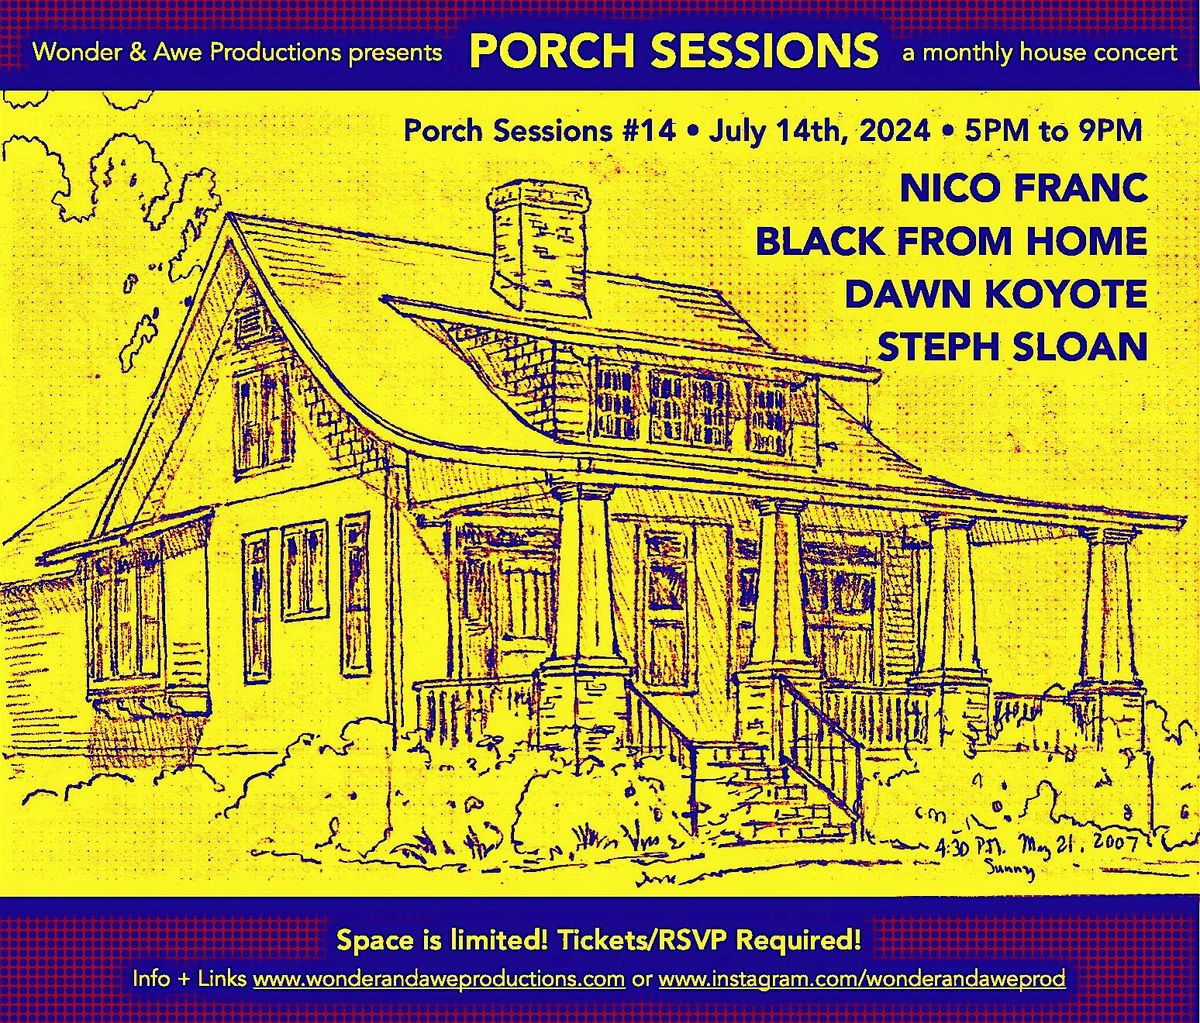 Porch Sessions #14